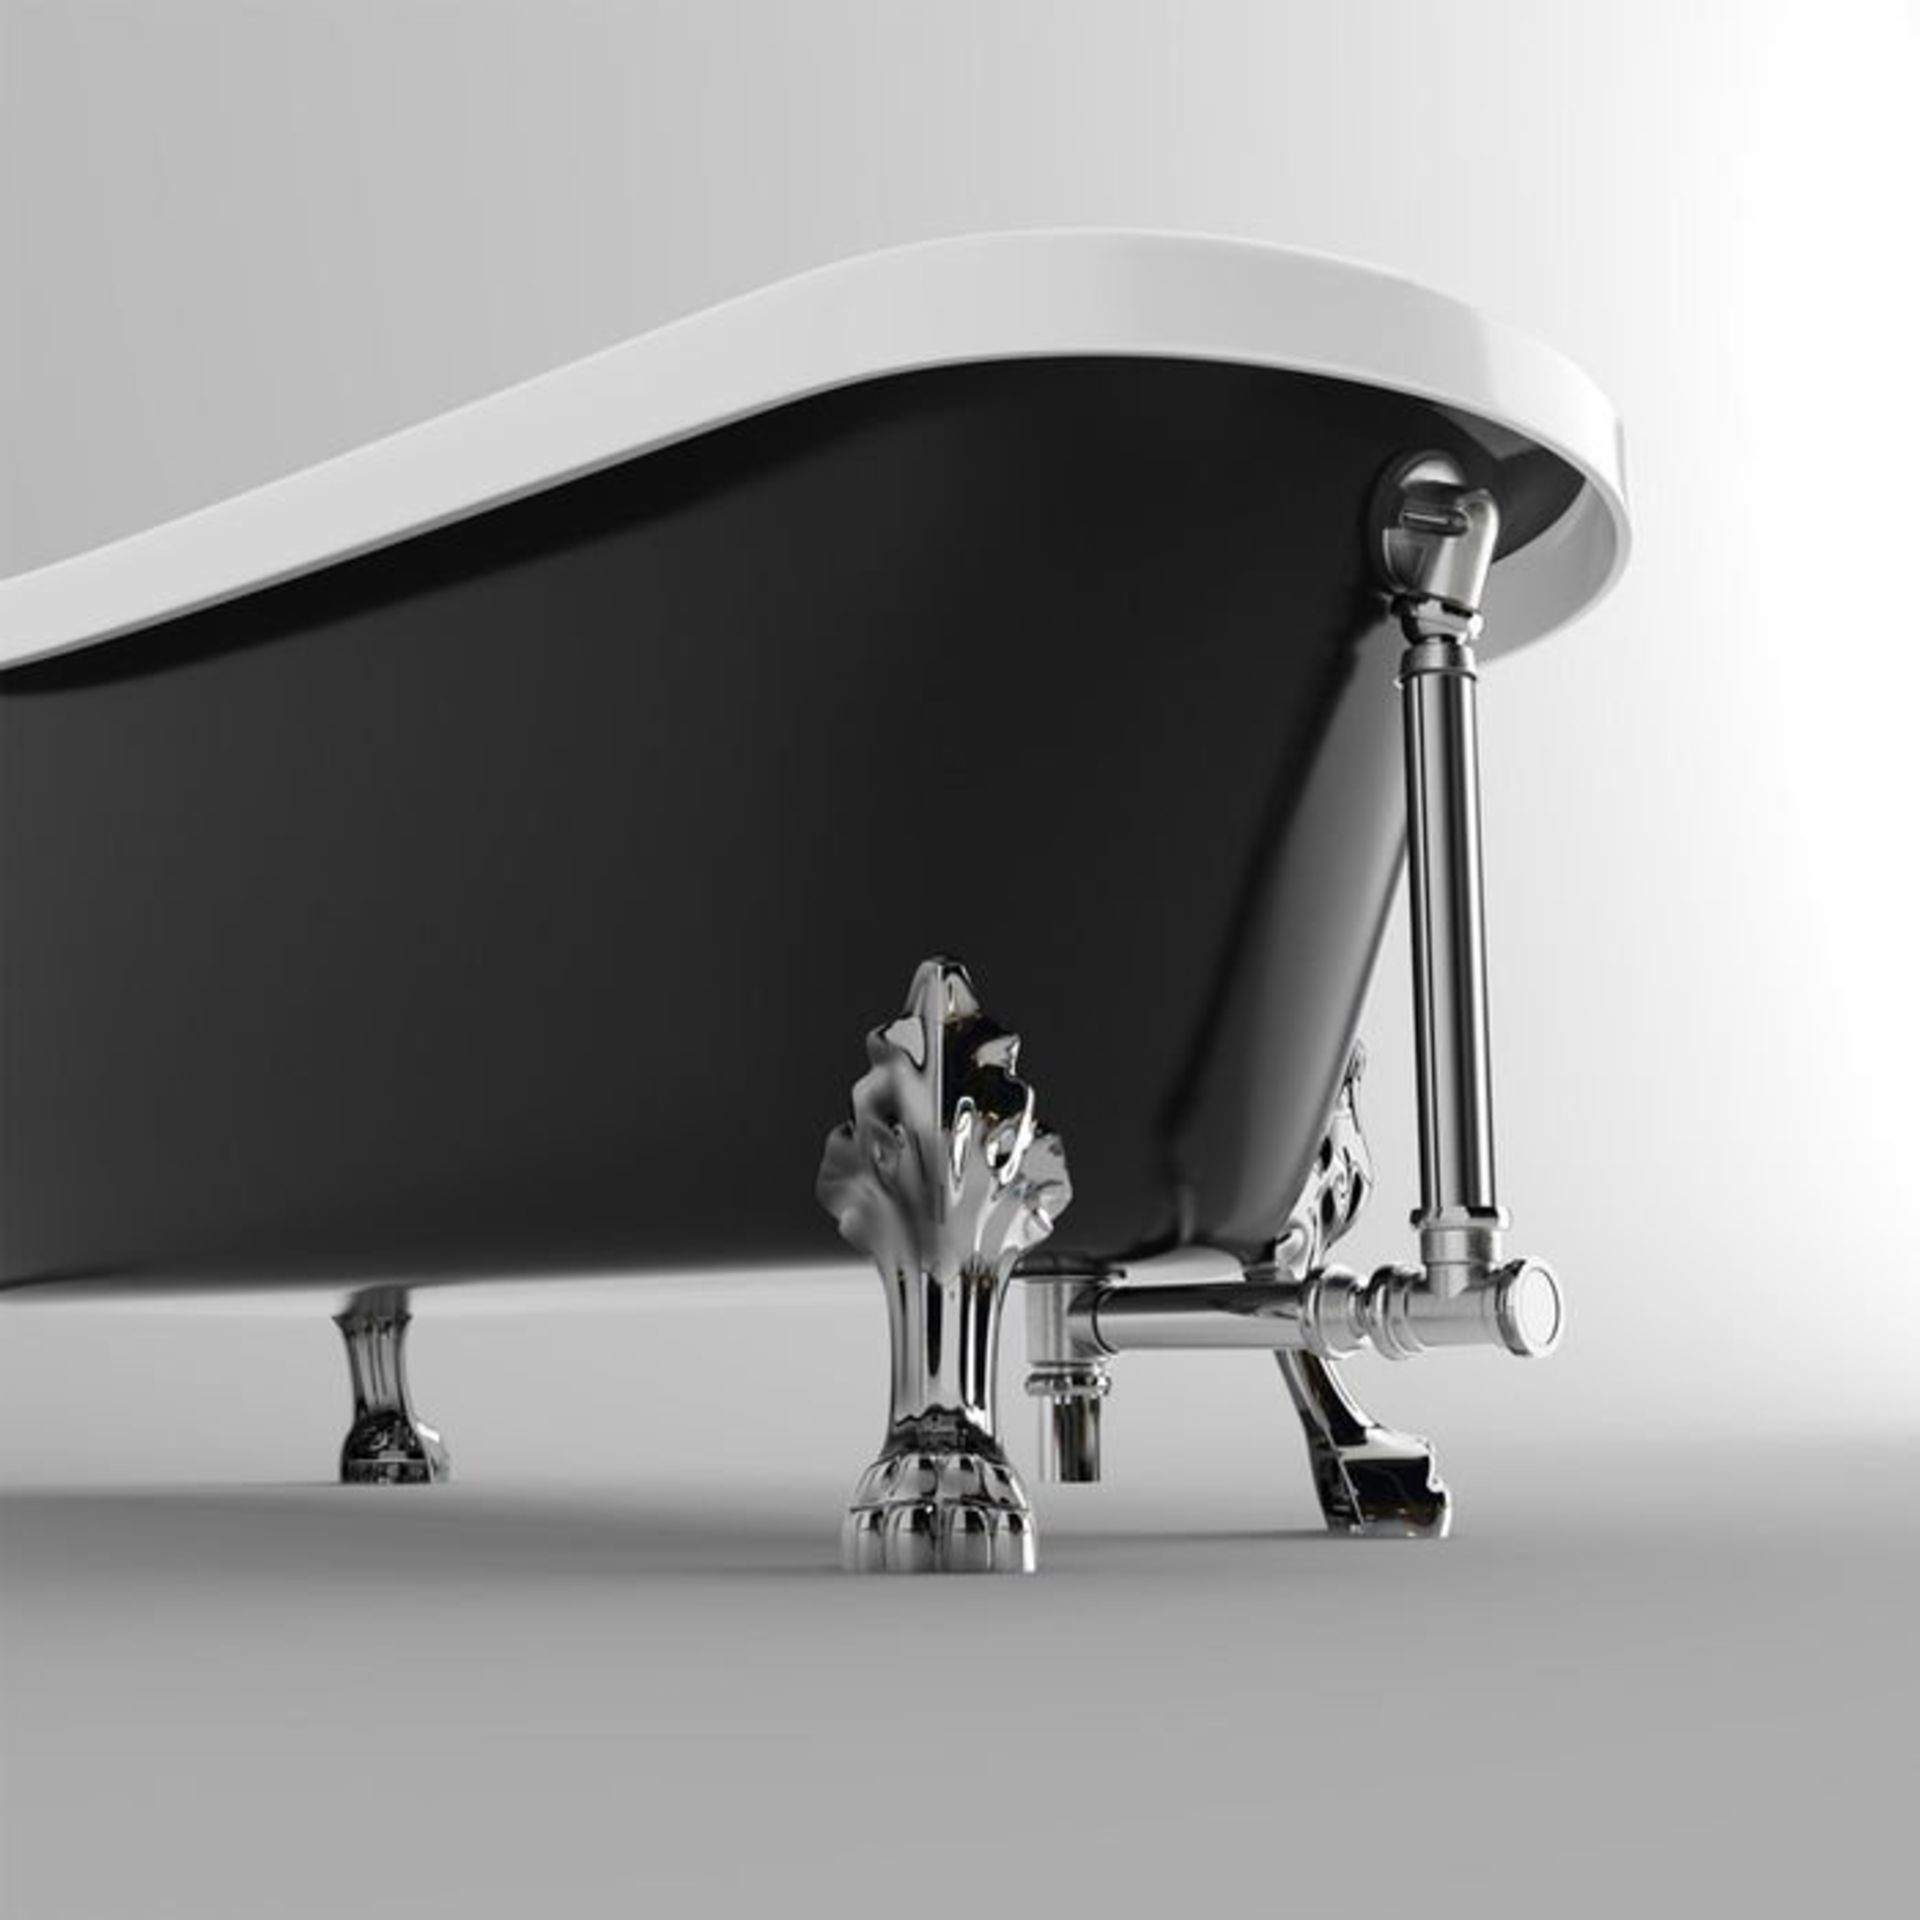 (S186) 400x215mm Exposed Bath Waste For Roll Top Bath. RRP £124.99. Chrome plated surface for a